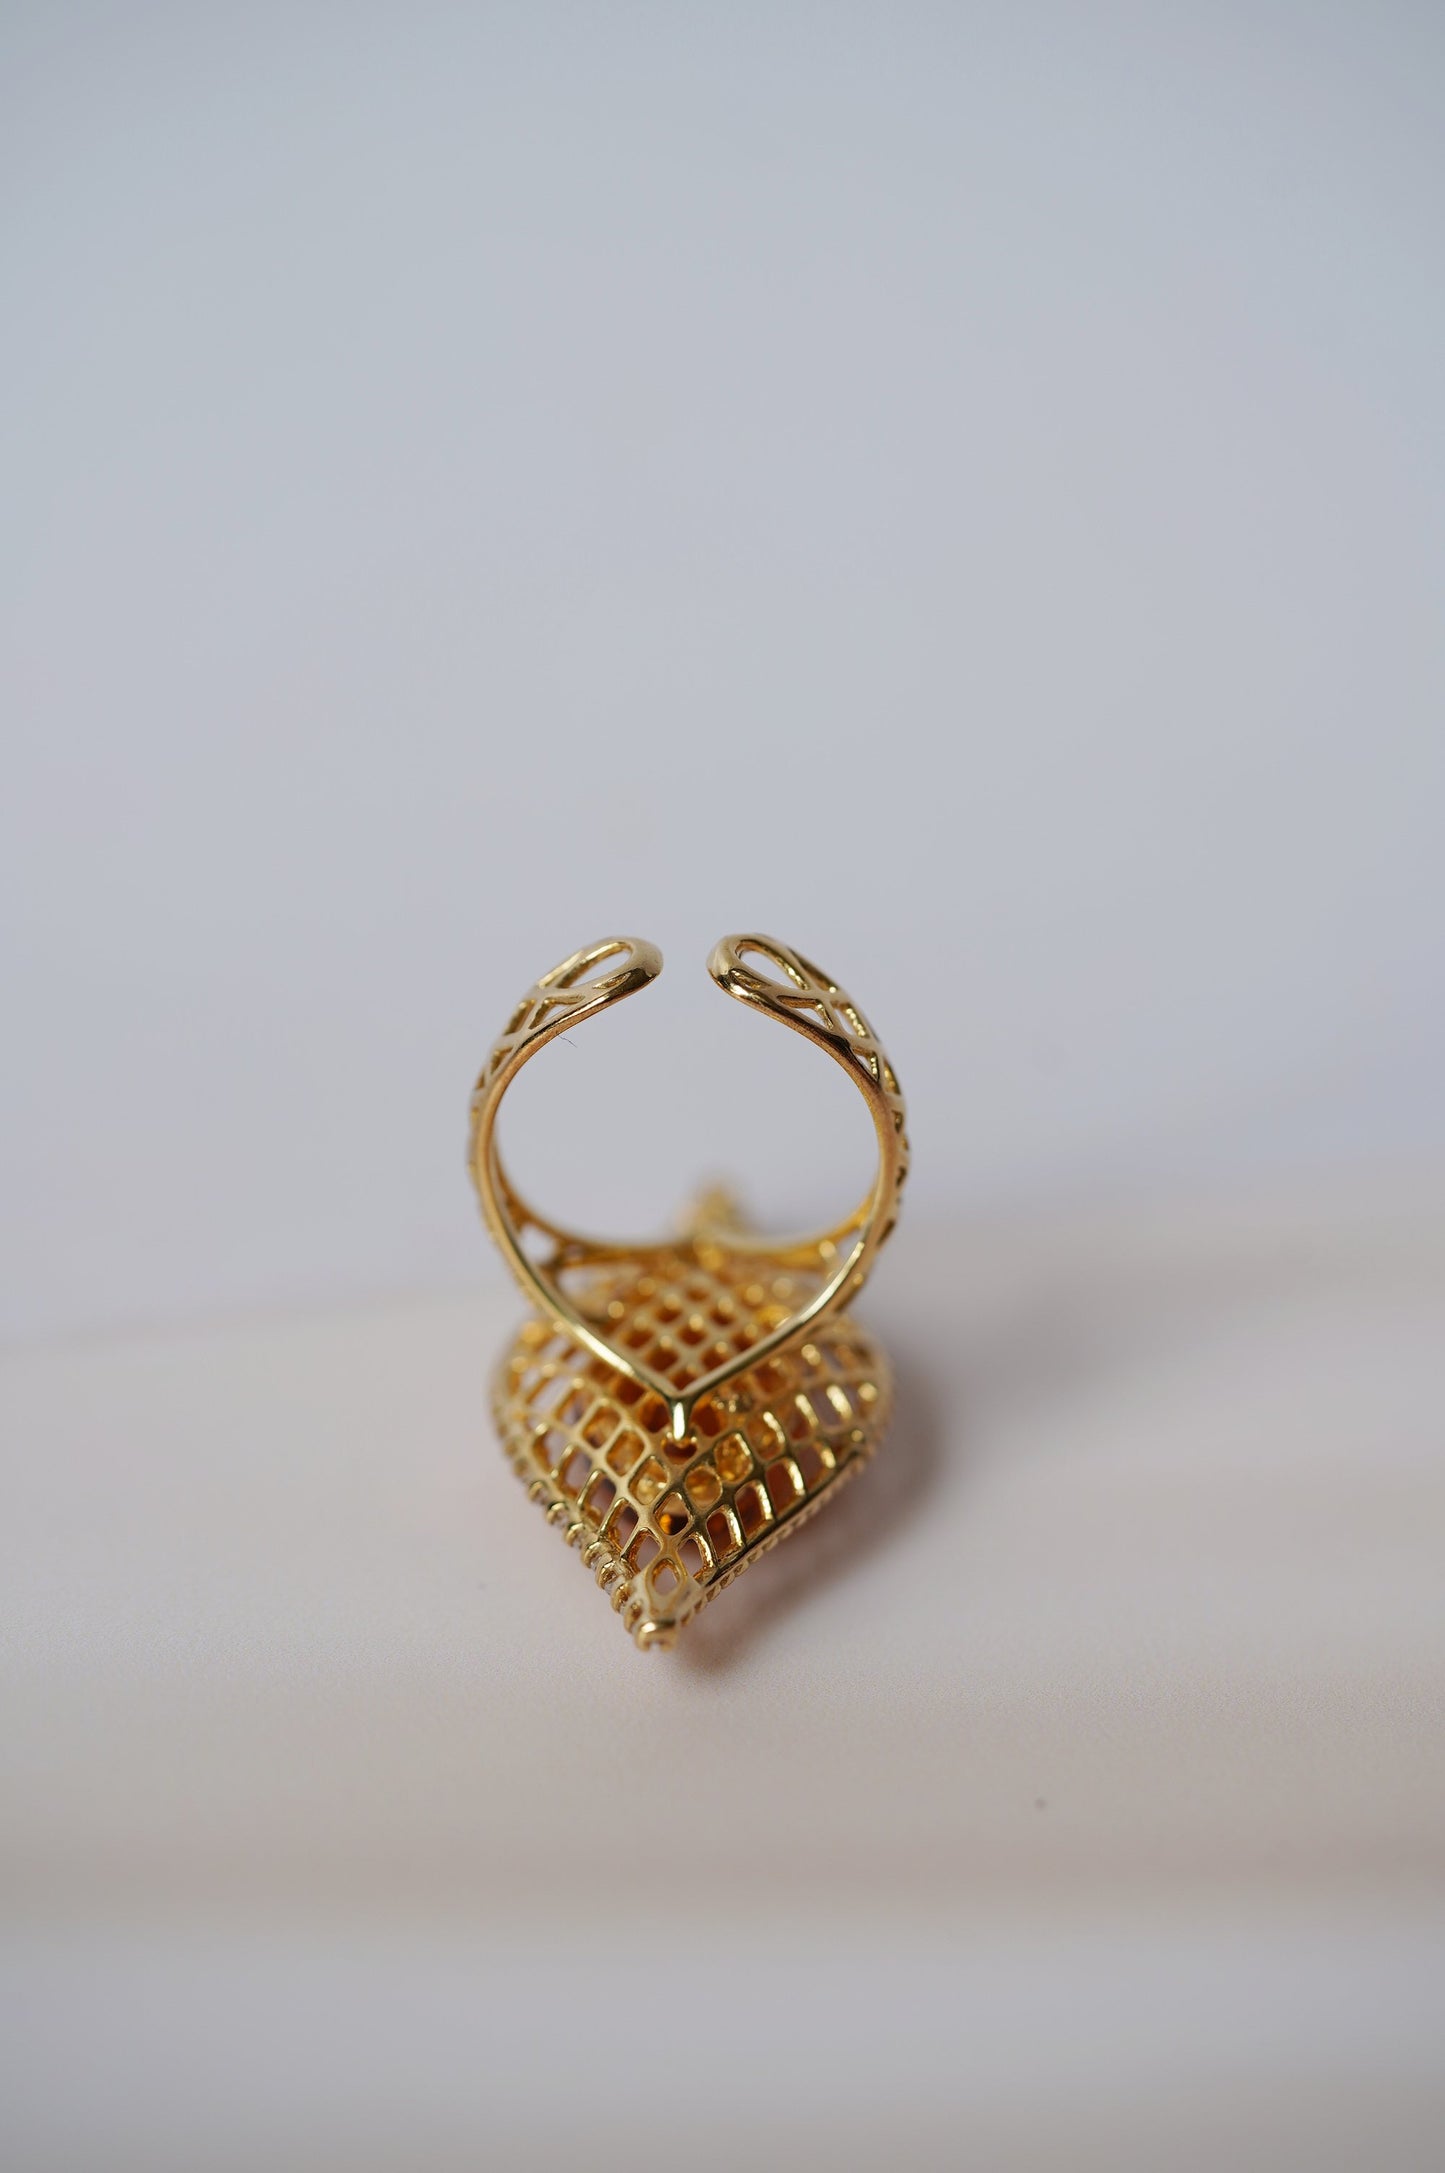 Marquise Shape Ring with Natural Cognac Amber and Cubic Zirconias in Gold Plated Silver